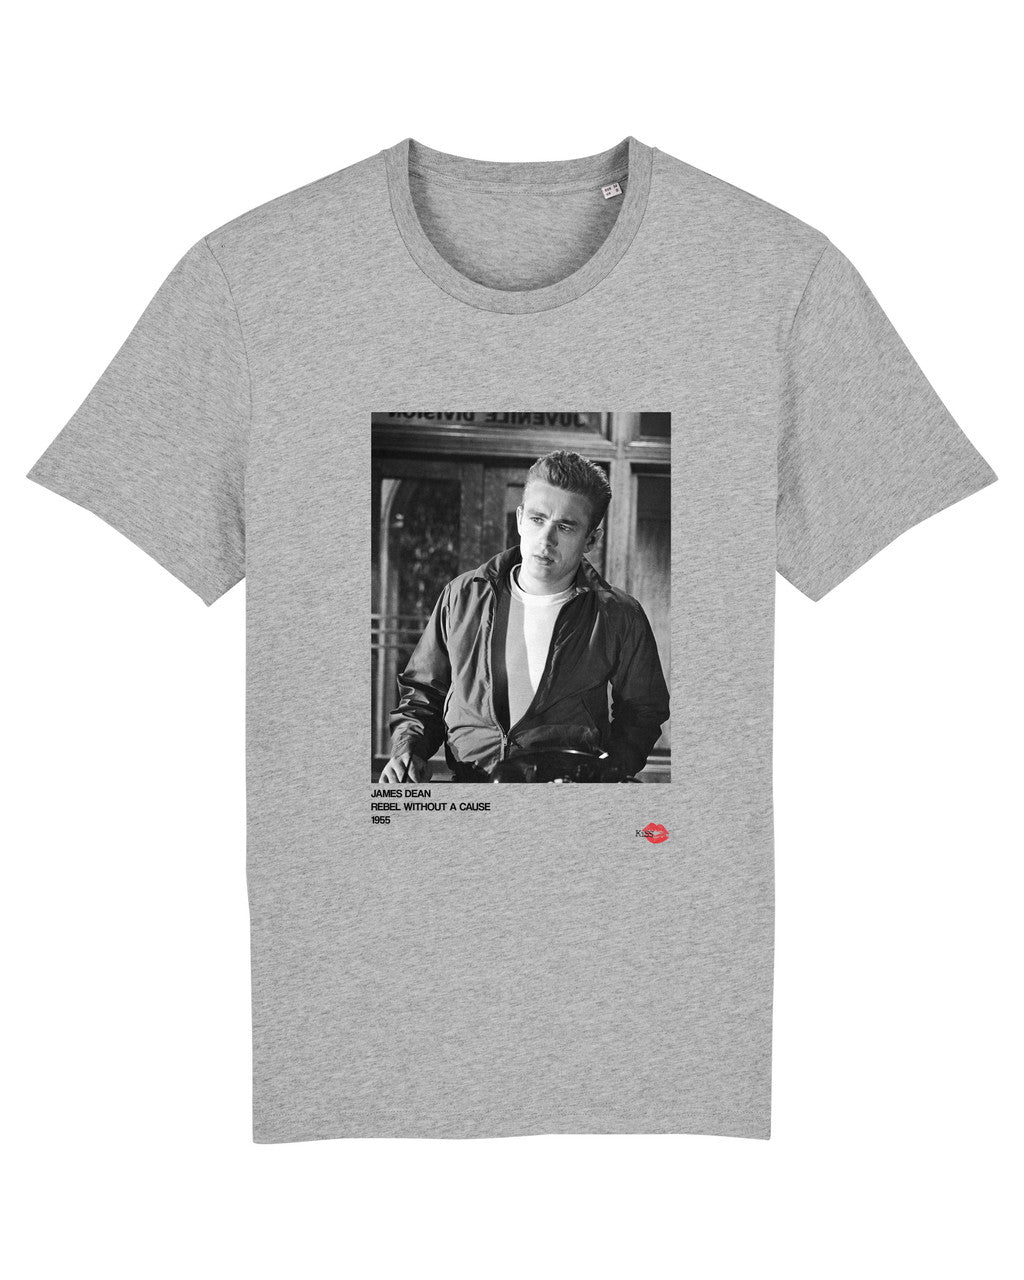 James Dean 1955 KiSS T-Shirt - Rebel Without a Cause - 50s movie - Classic - Icon